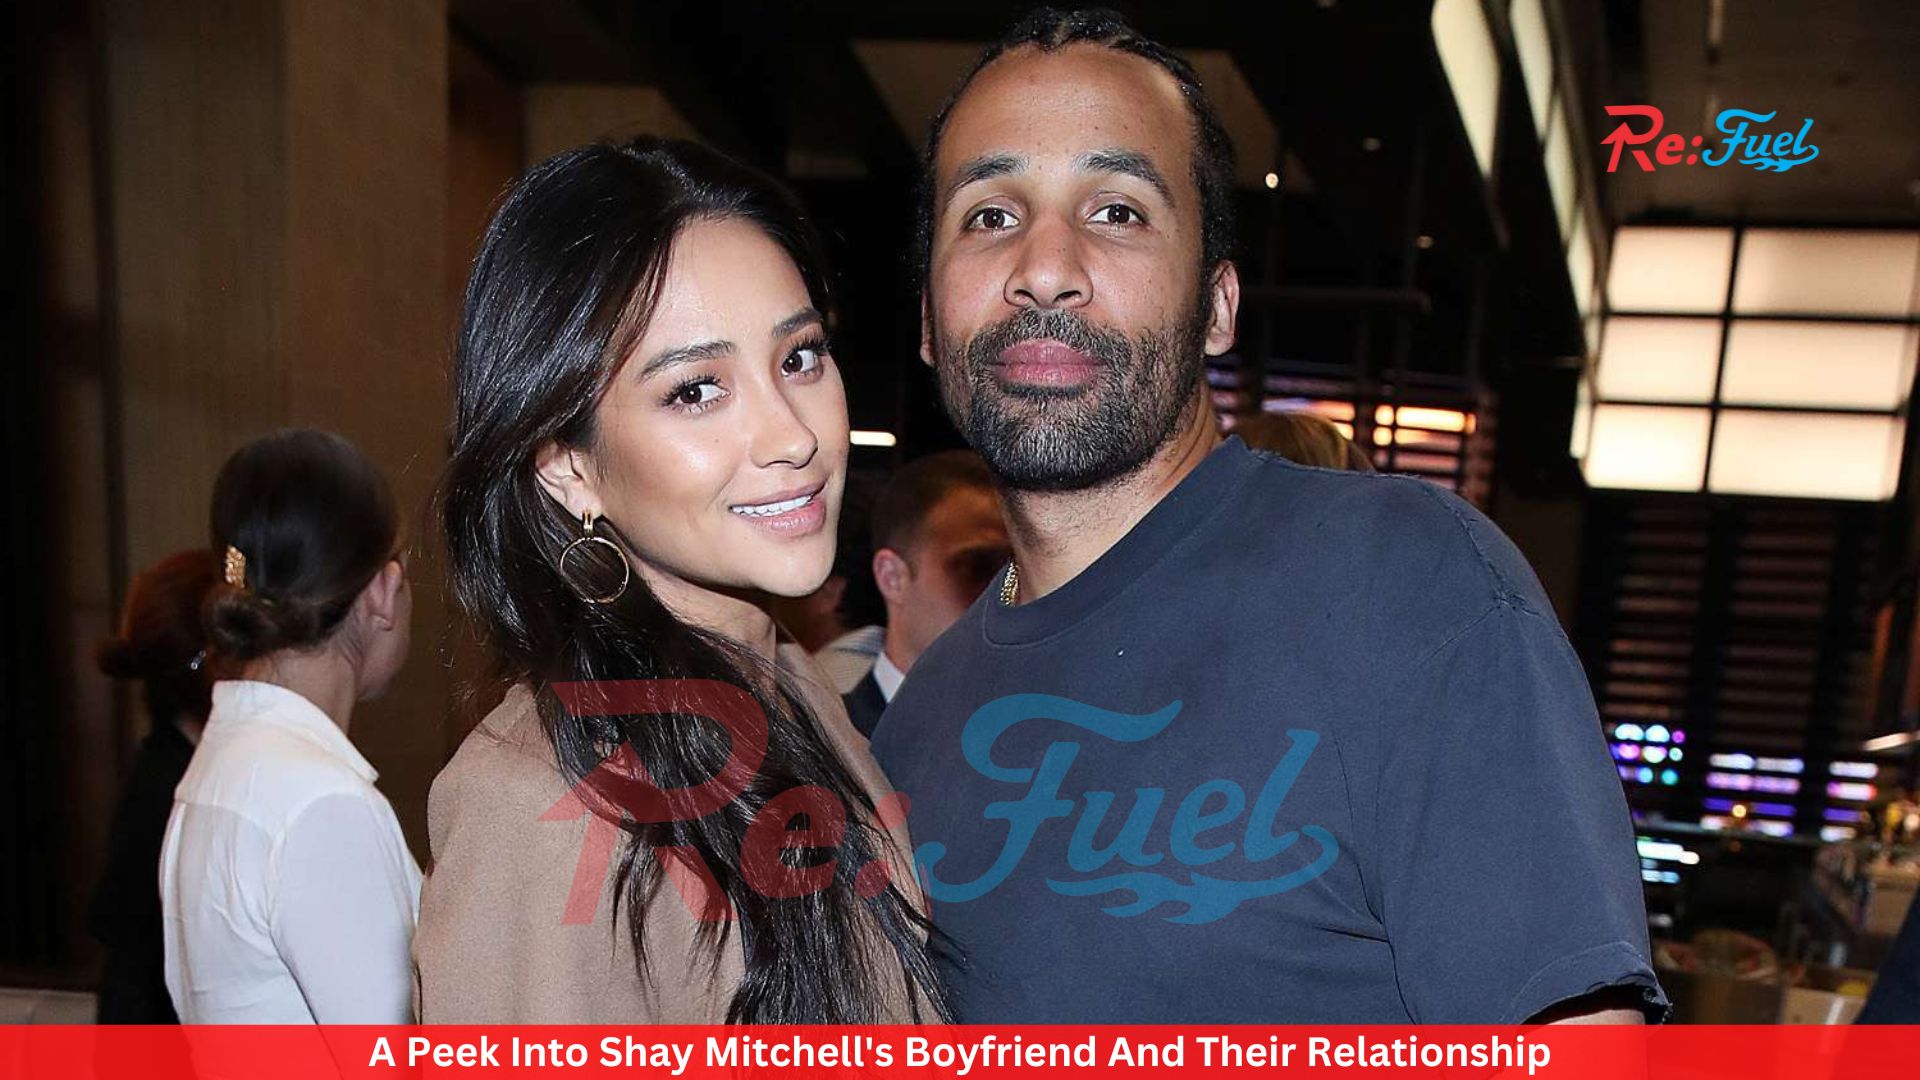 A Peek Into Shay Mitchell's Boyfriend And Their Relationship